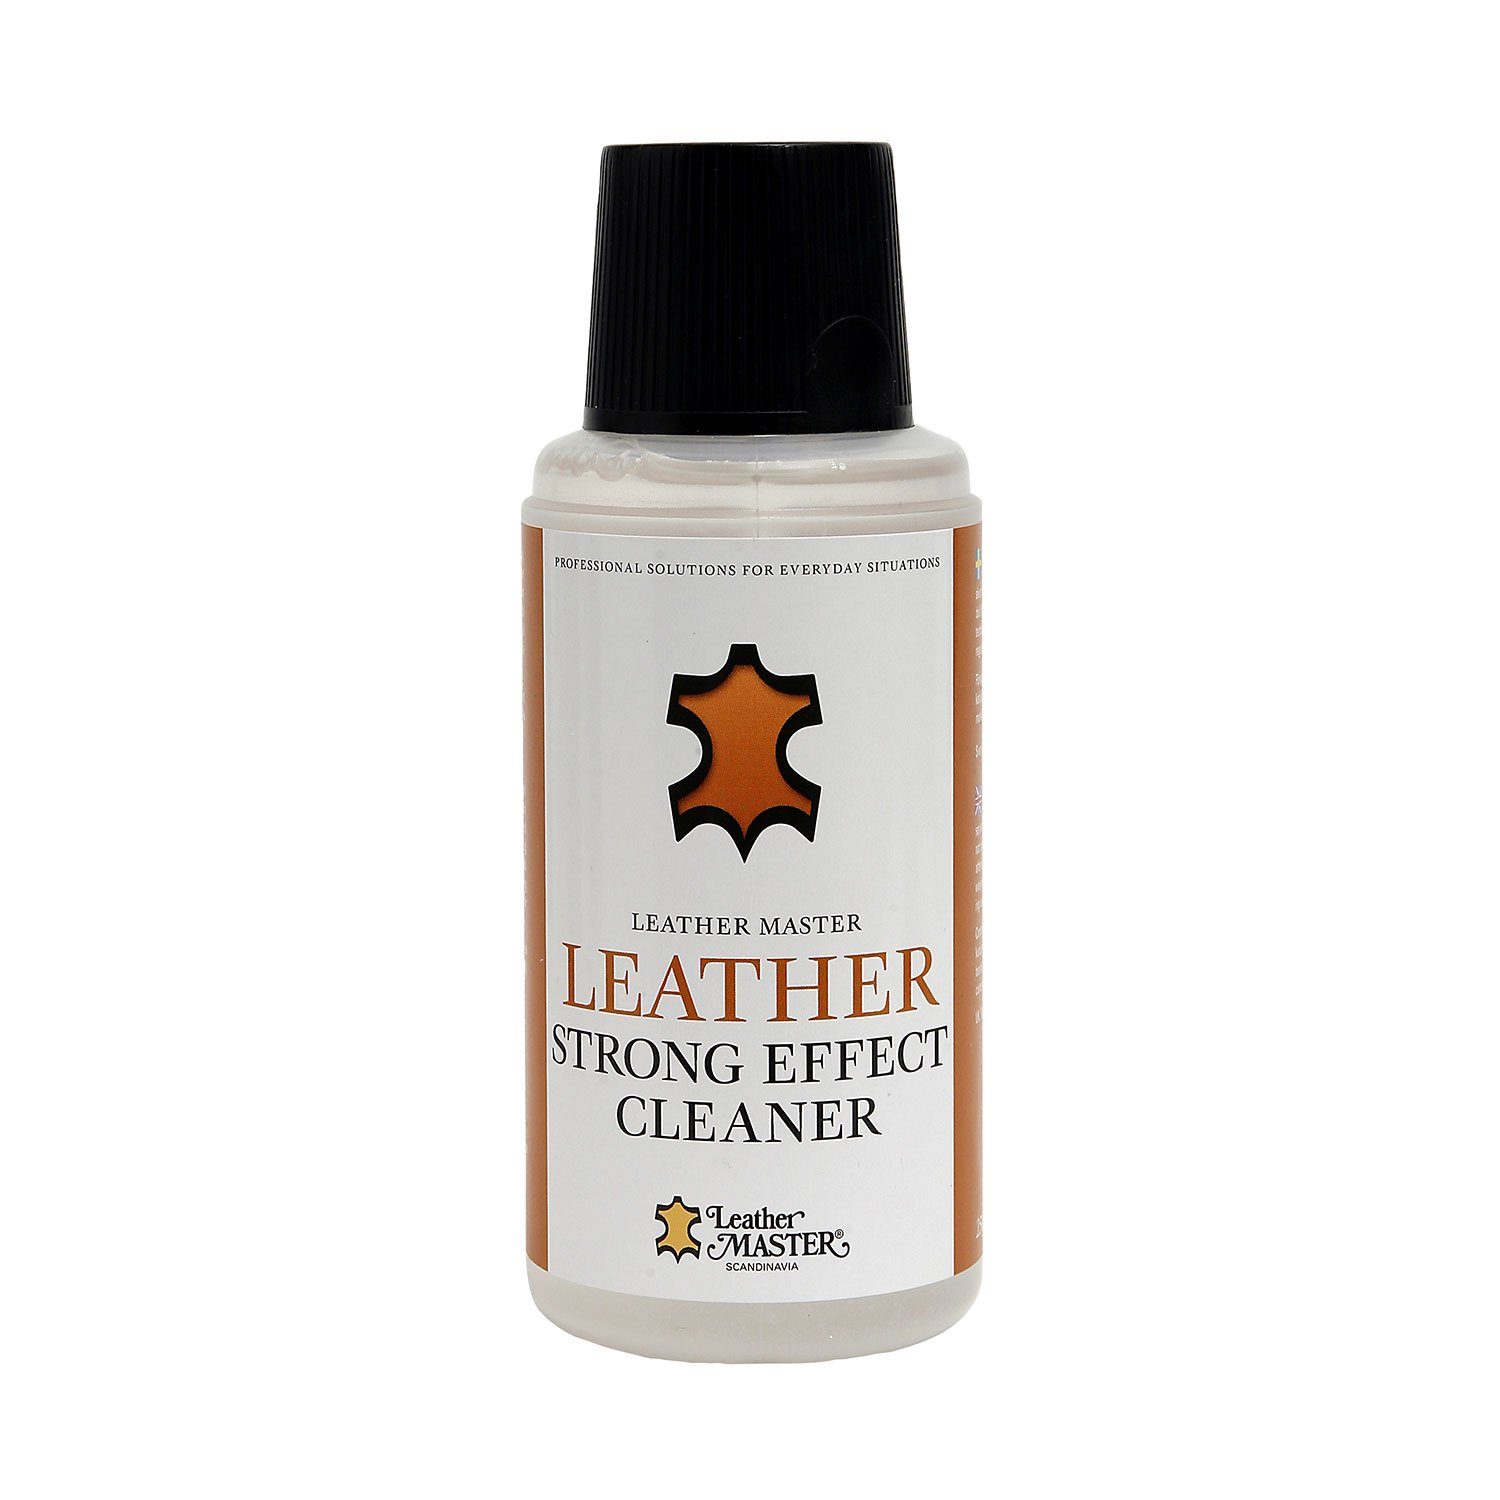 Strong effect leather cleaner från Leather Master.